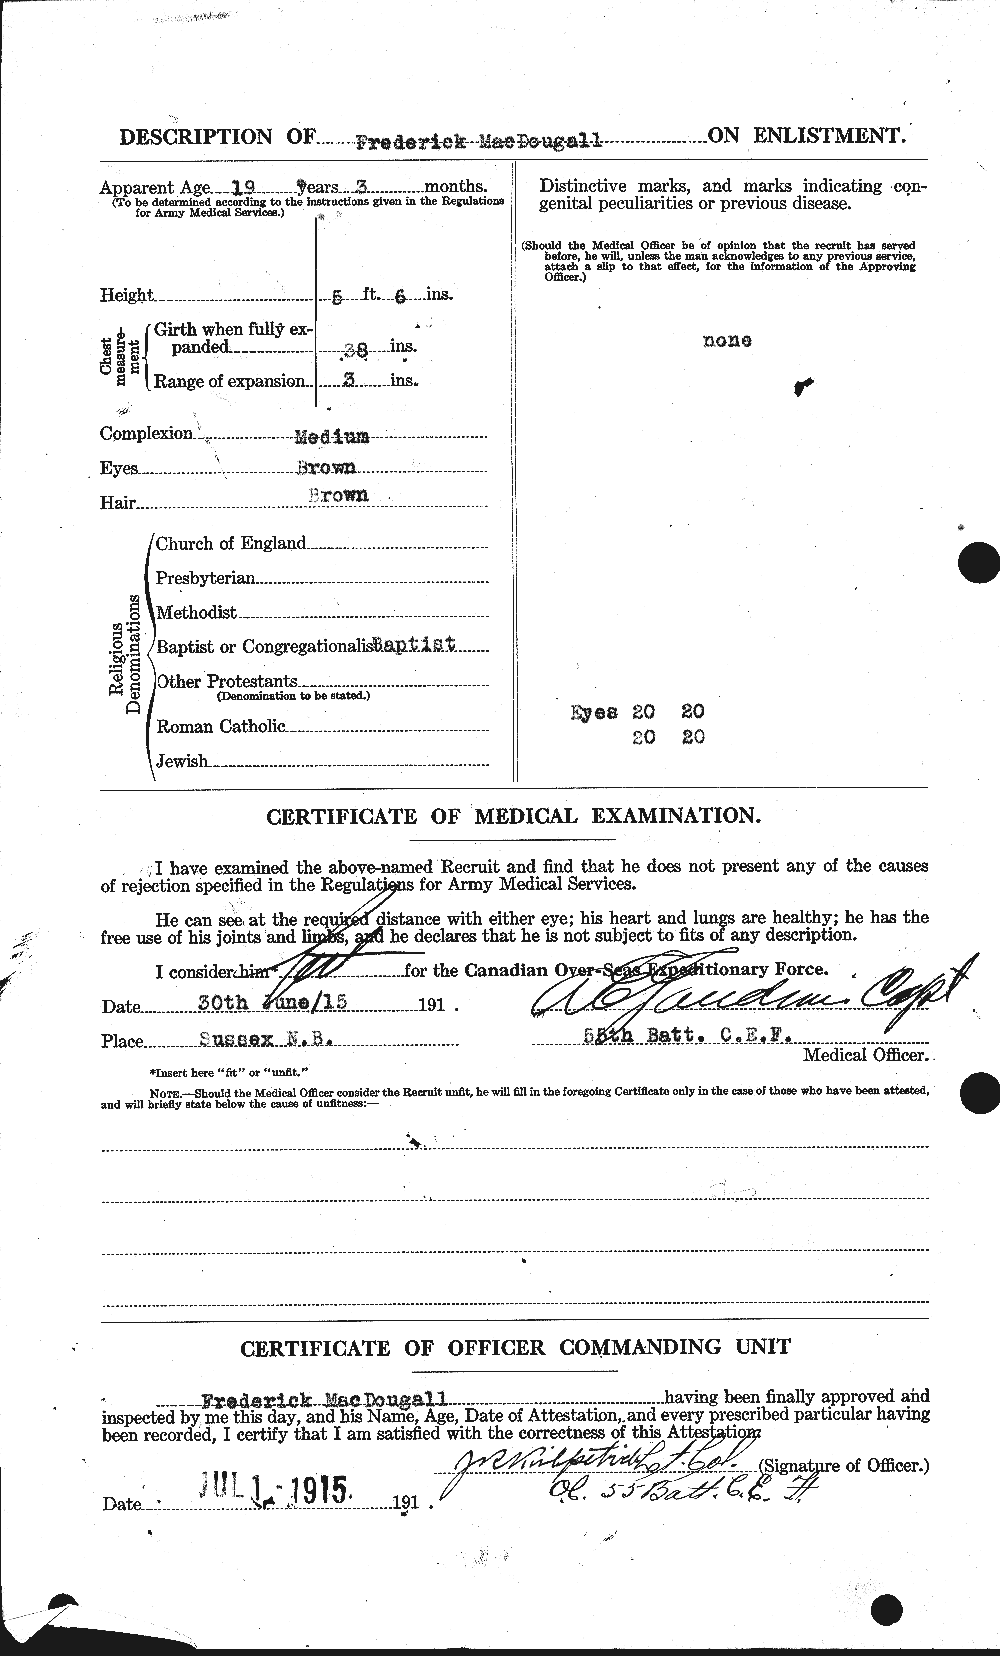 Personnel Records of the First World War - CEF 525391b